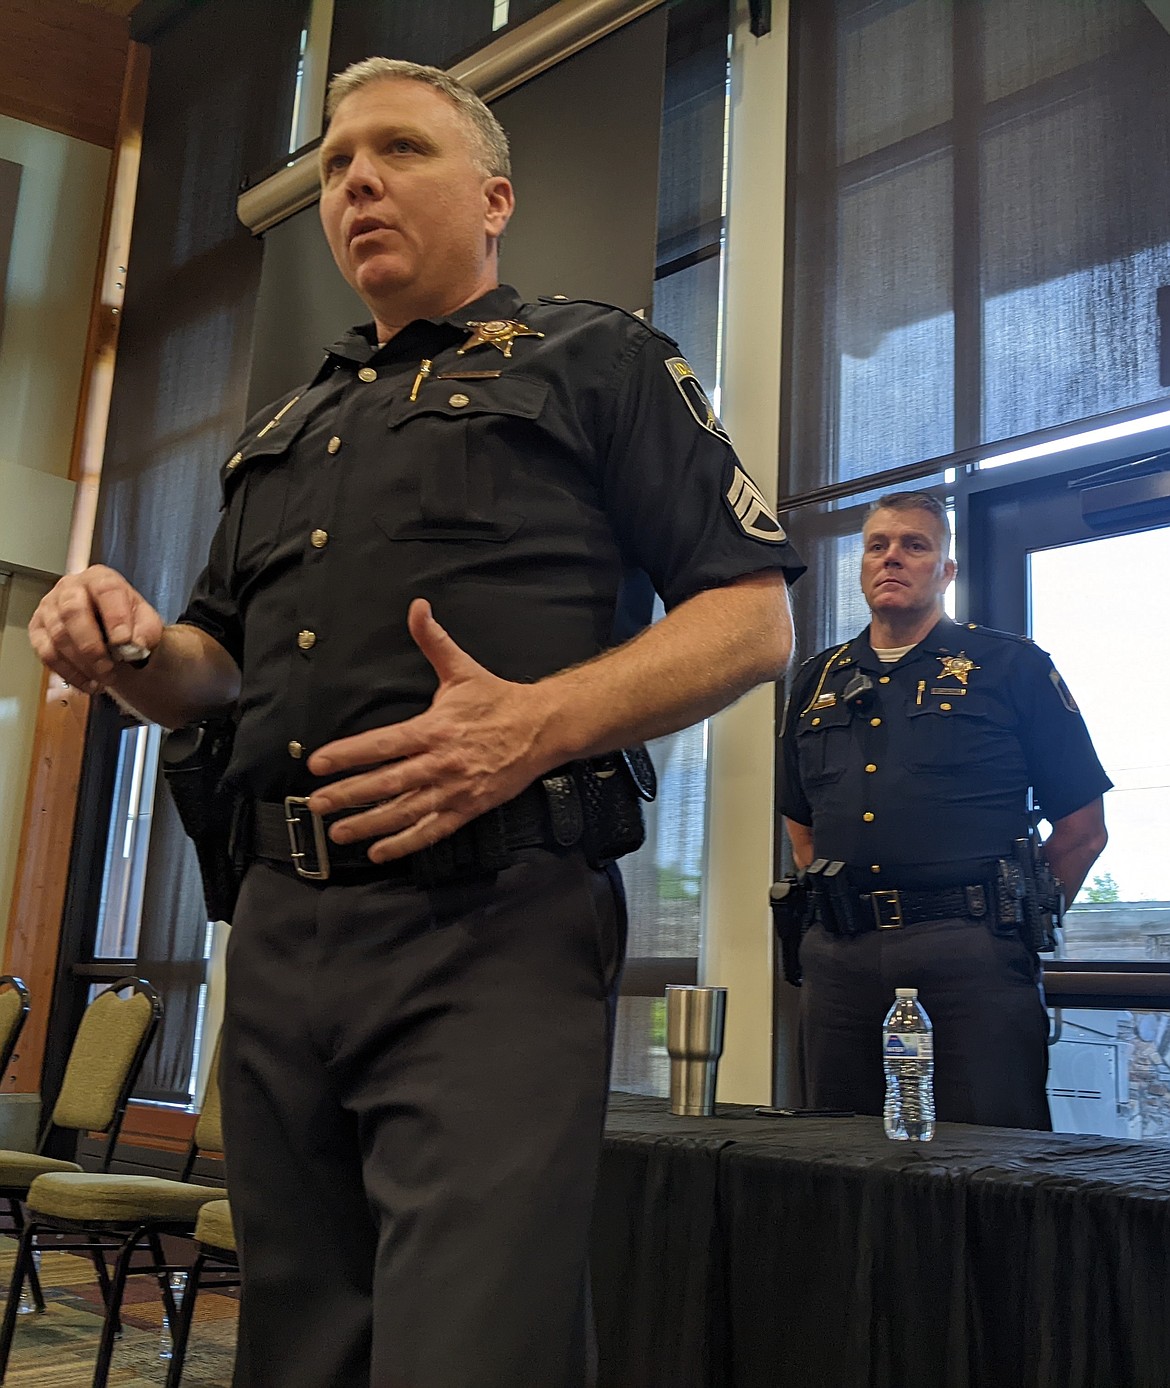 ISP Sgt. Jess Stennet and Cpt. John Kempf speak about the dangers of fentanyl during Wednesday's presentation.